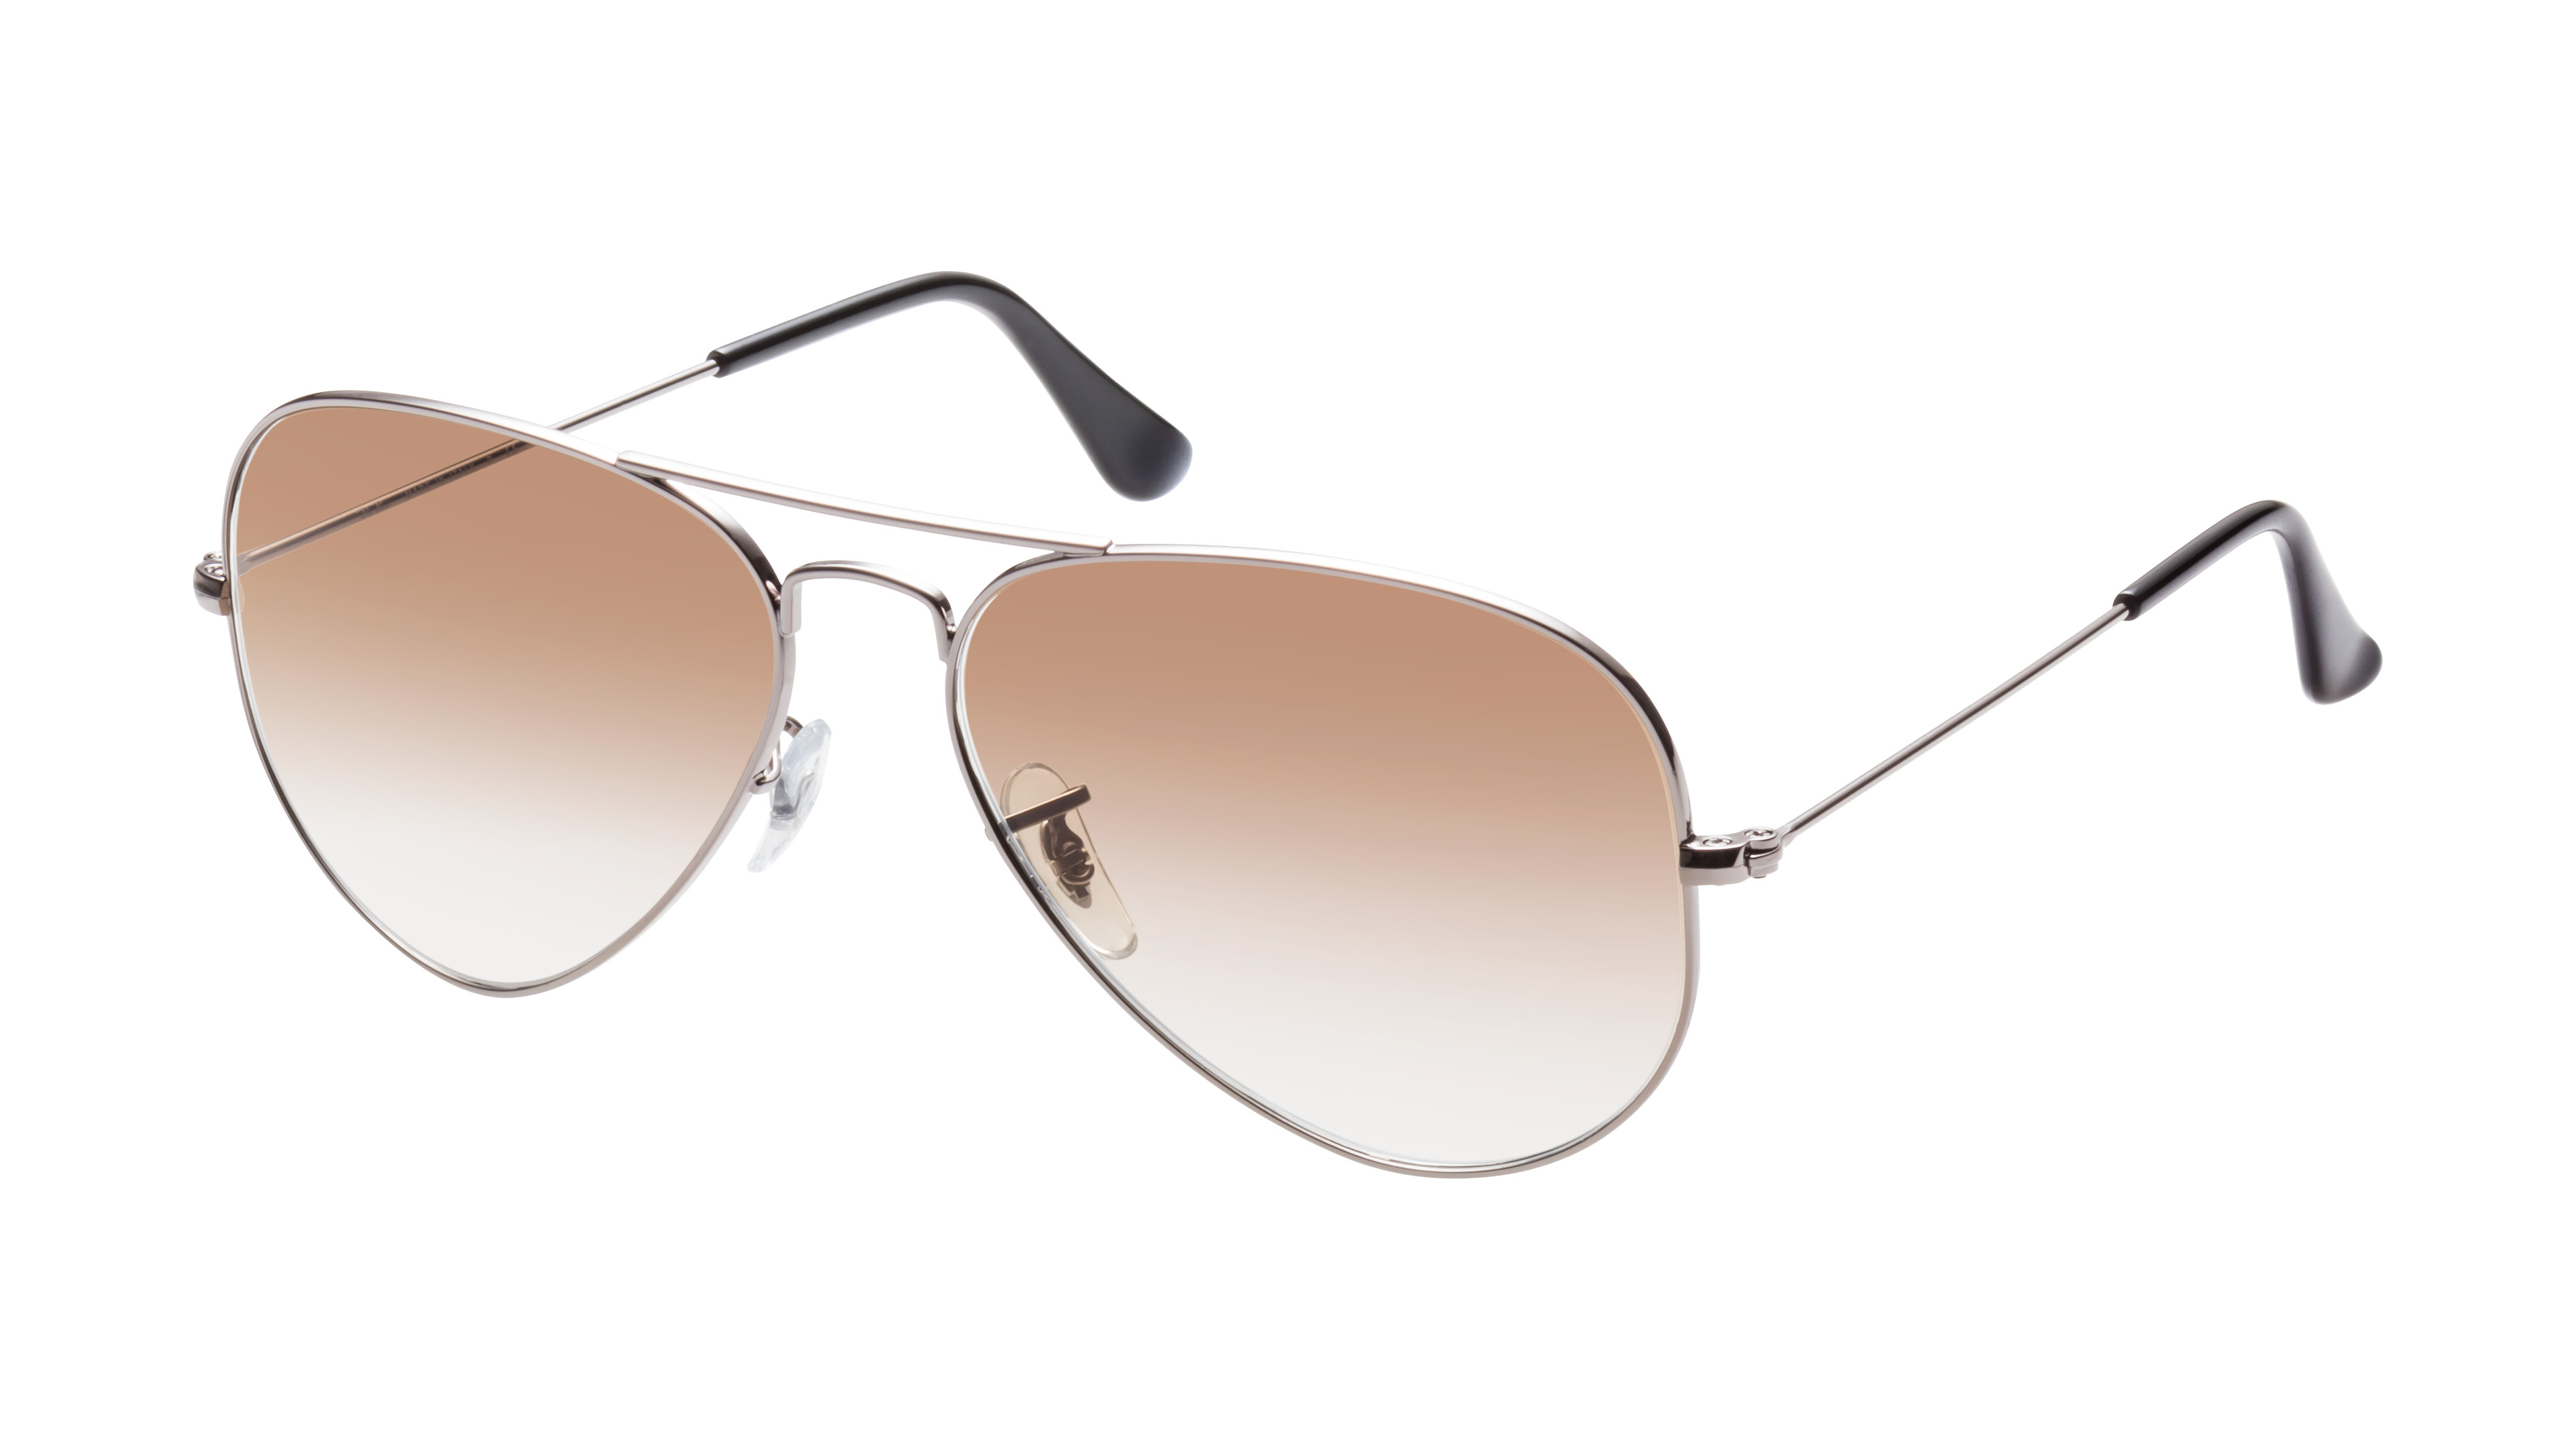 [products.image.angle_left01] Ray-Ban AVIATOR LARGE METAL 0RB3025 004/51 Sonnenbrille